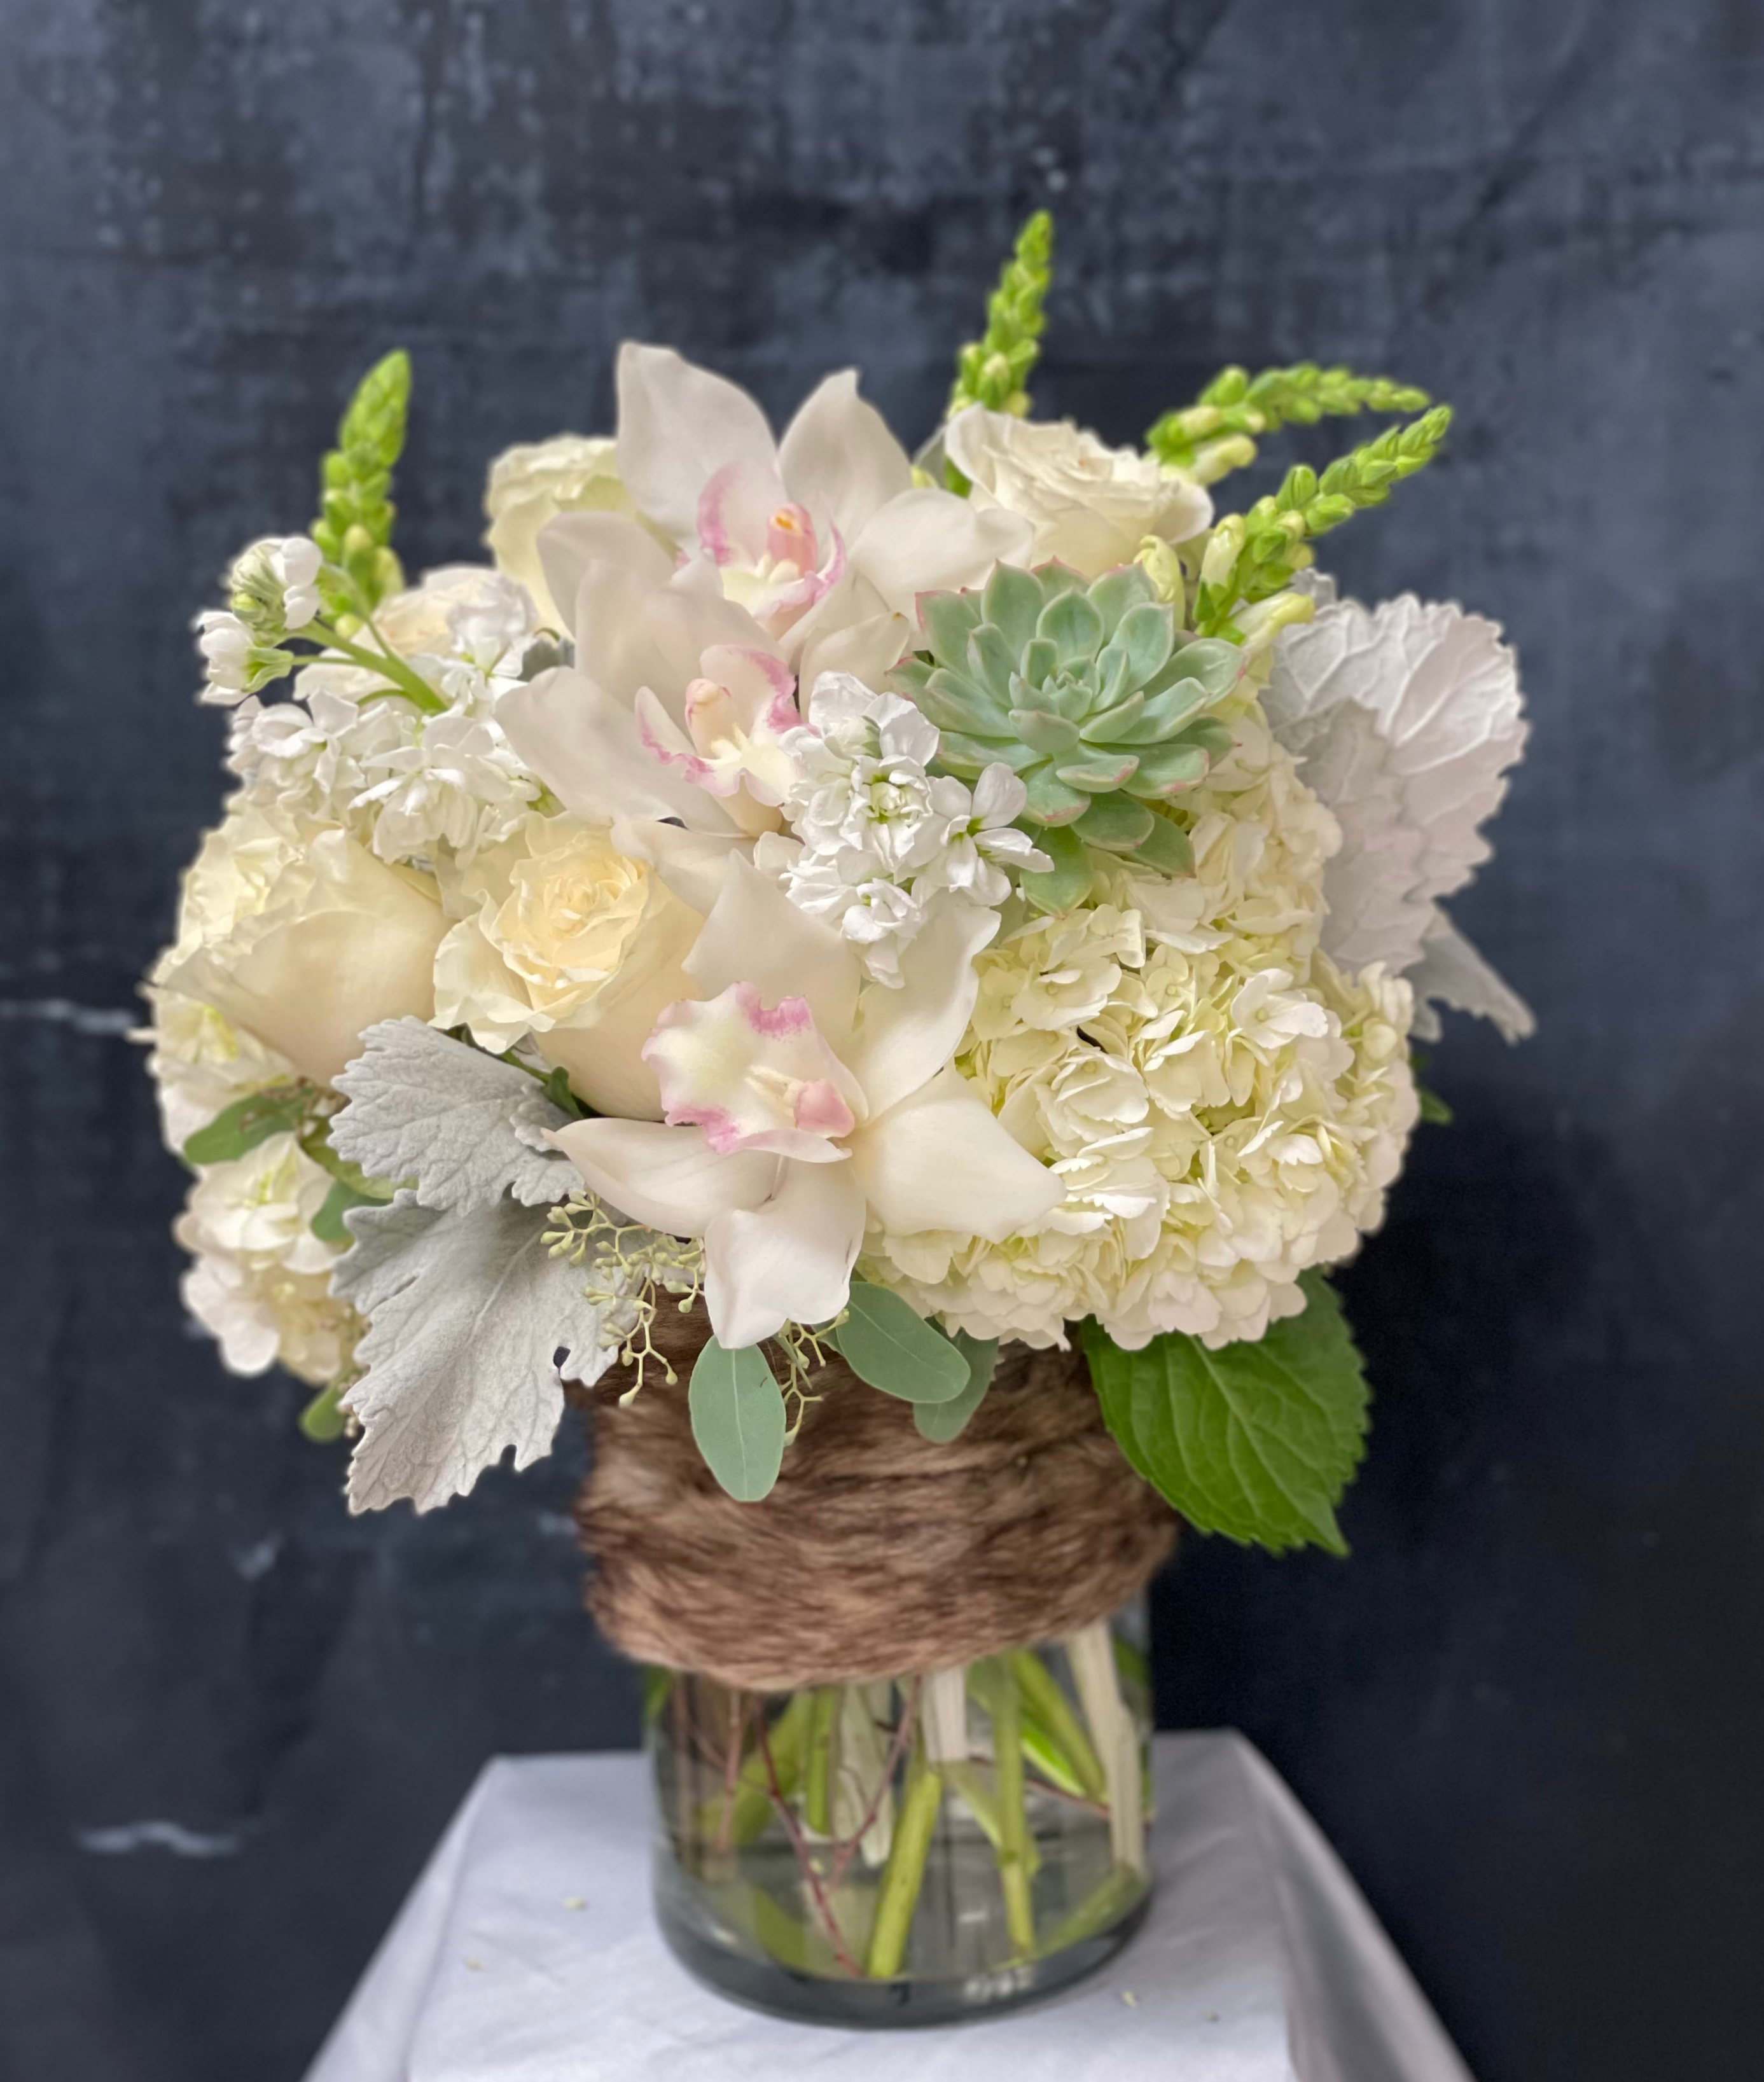 Beautiful In White - White hydrangeas, white roses, white snapdragons, white cymbidium, white stock, succulent and greenery. The vase wrapped with faux fur. 